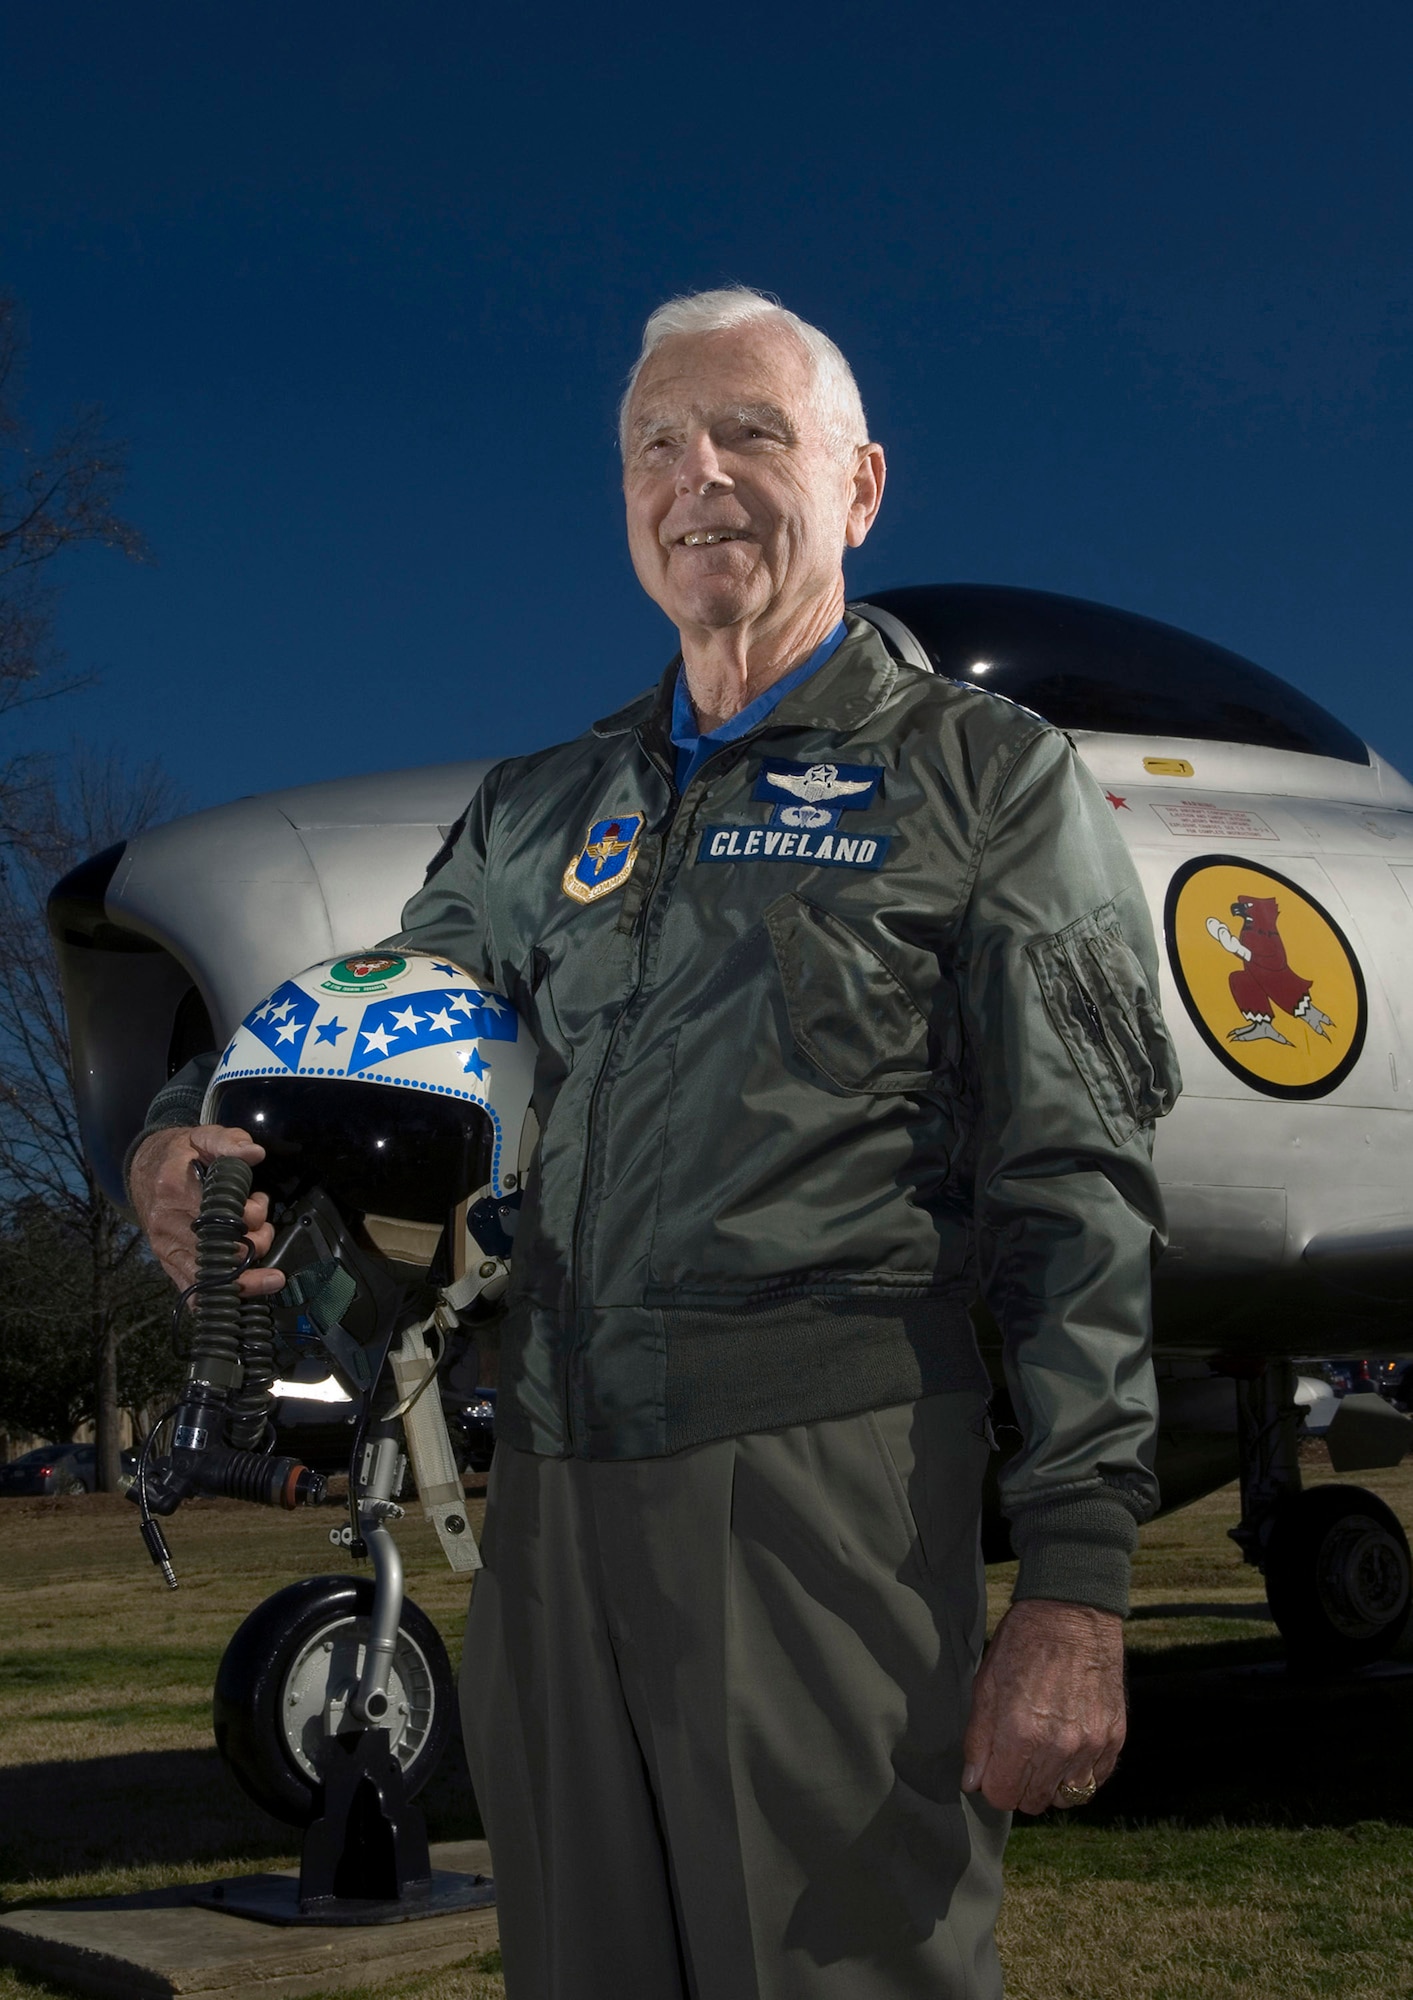 Retired Lt. Gen. Charles G. Cleveland stands before a remake "Chris Craft" F-86A Sabre now a part of the air park at Maxwell Air Force Base, Ala. The "Chris Craft" named after General Cleveland's son, was the aircraft he used to shoot down five MiG-15s during the Korean War. General Cleveland was deployed to South Korea in March 1952, where he flew F-86s as a flight commander with the 4th Fighter Interceptor Wing at Kimpo Air Base. (U.S. Air Force photo/Staff Sgt. Bennie J. Davis III)